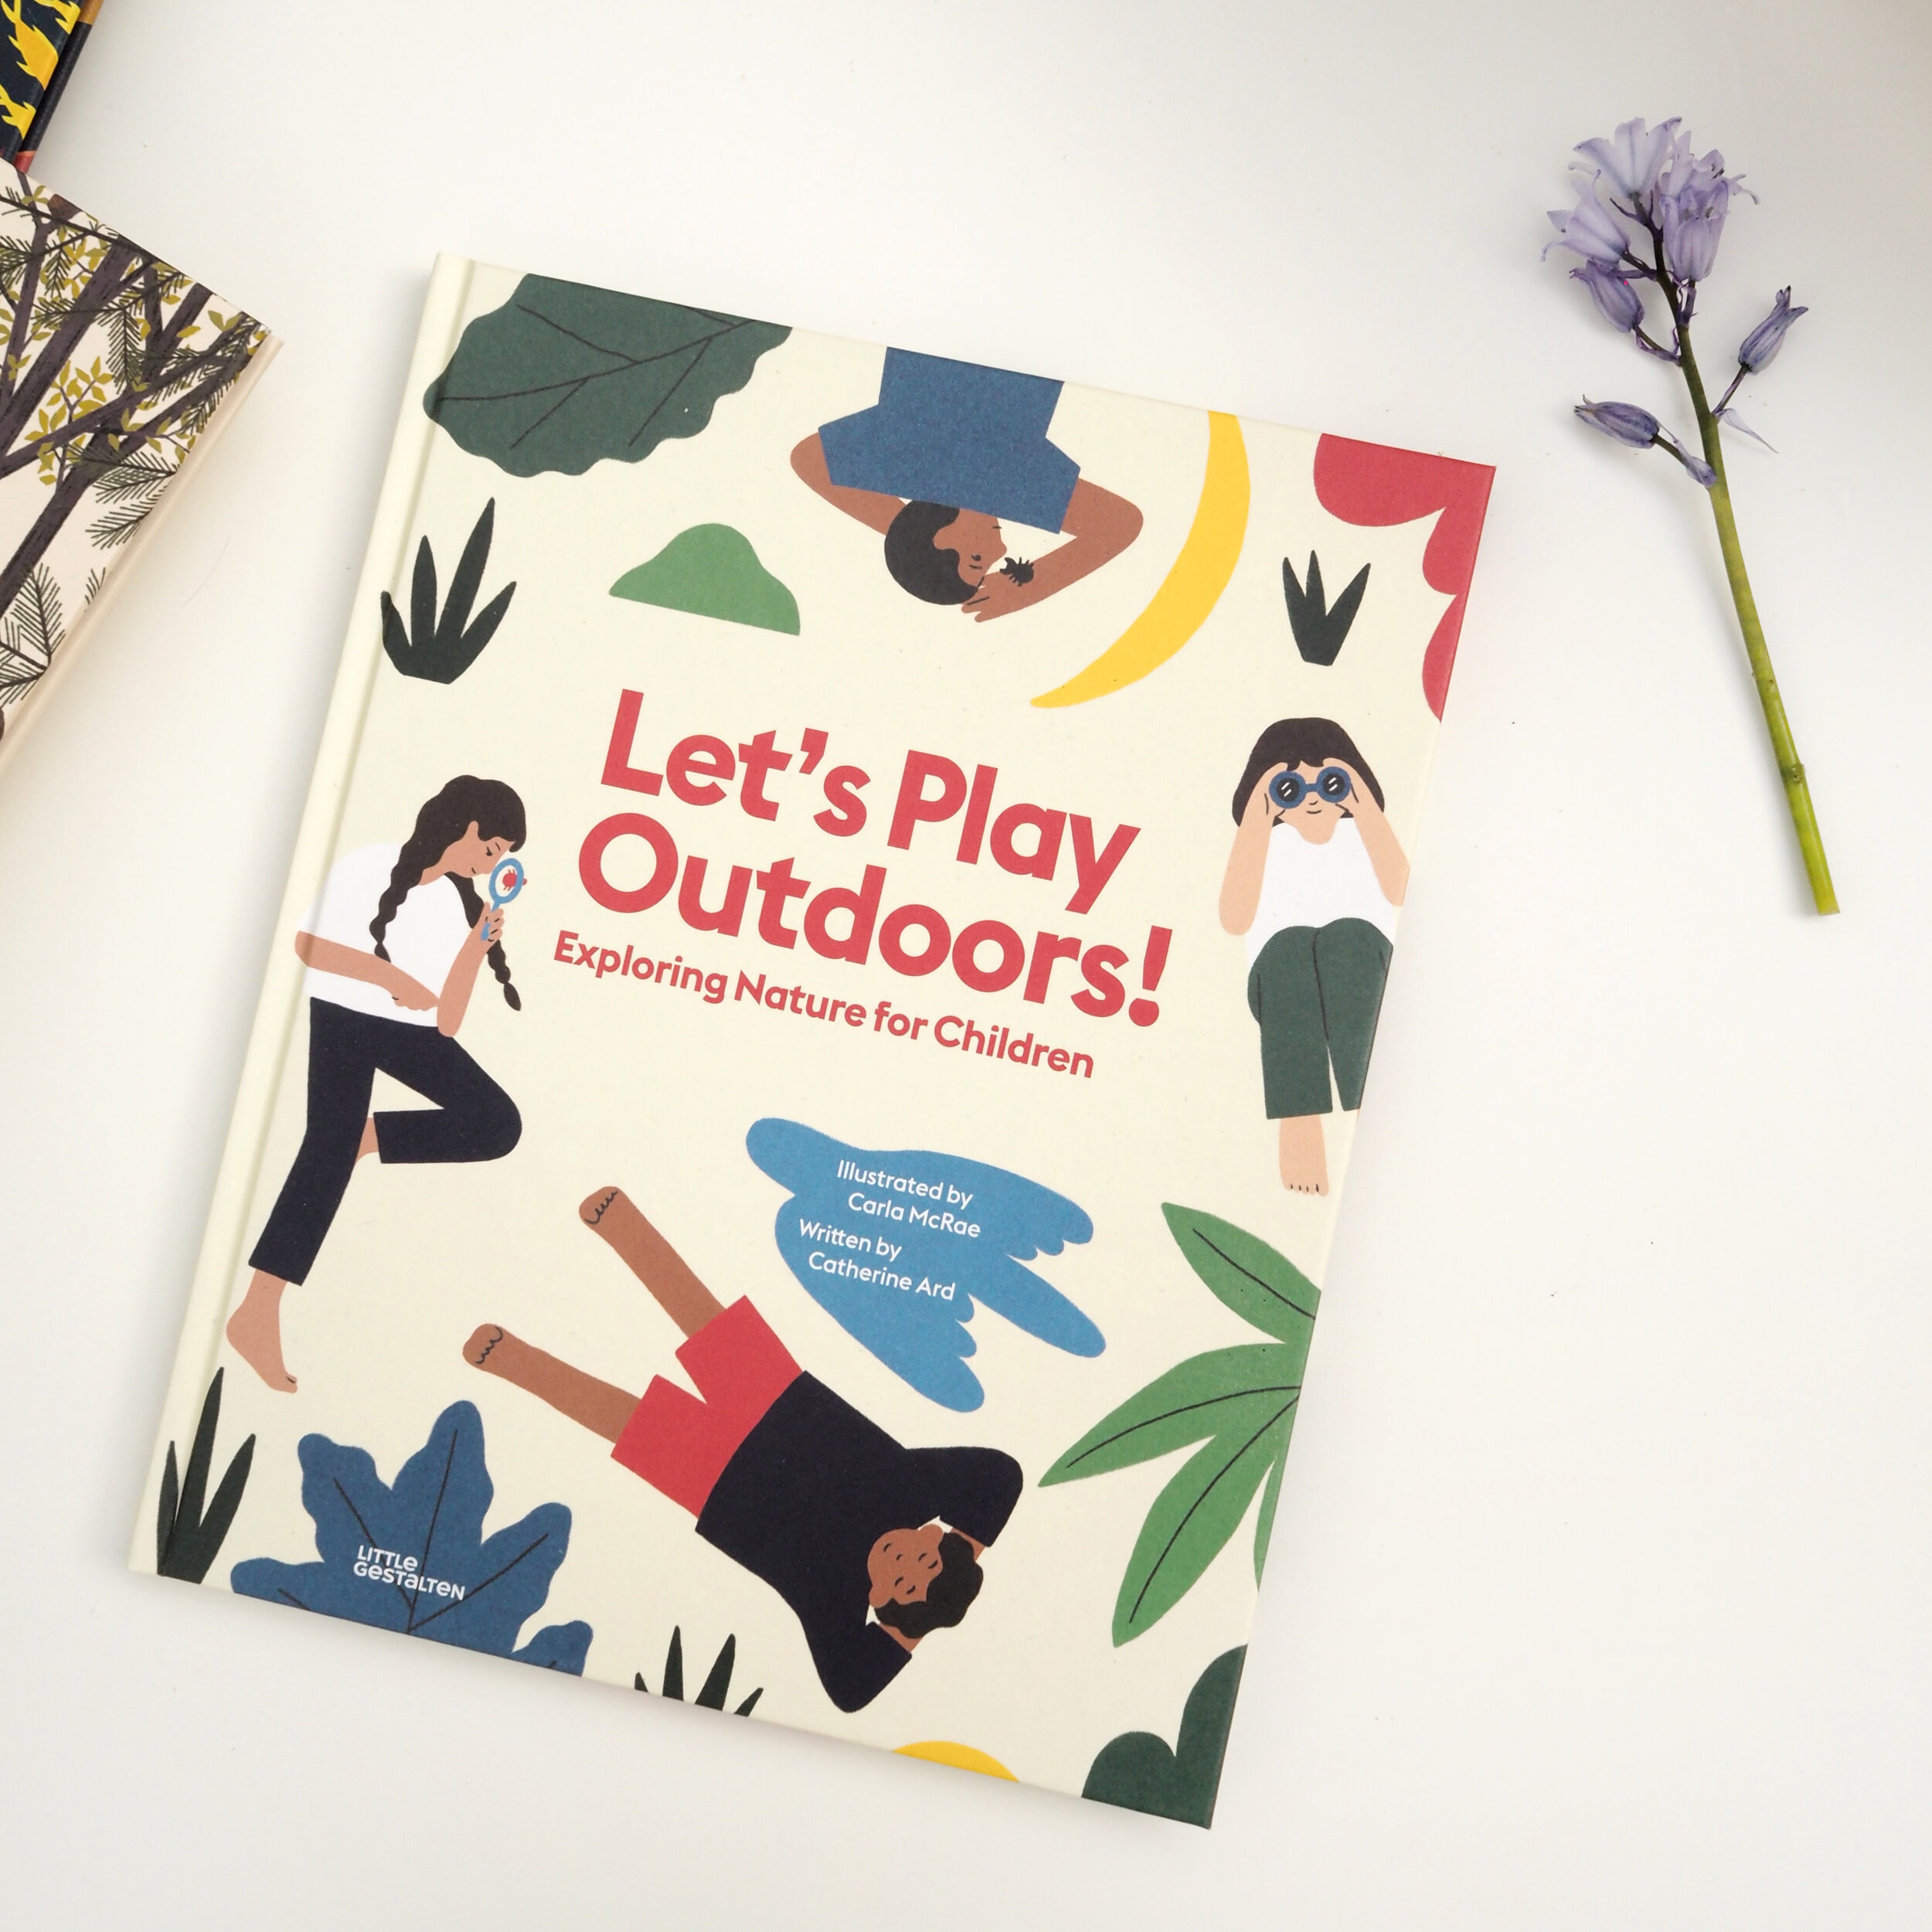 Lets Play Outdoors! book